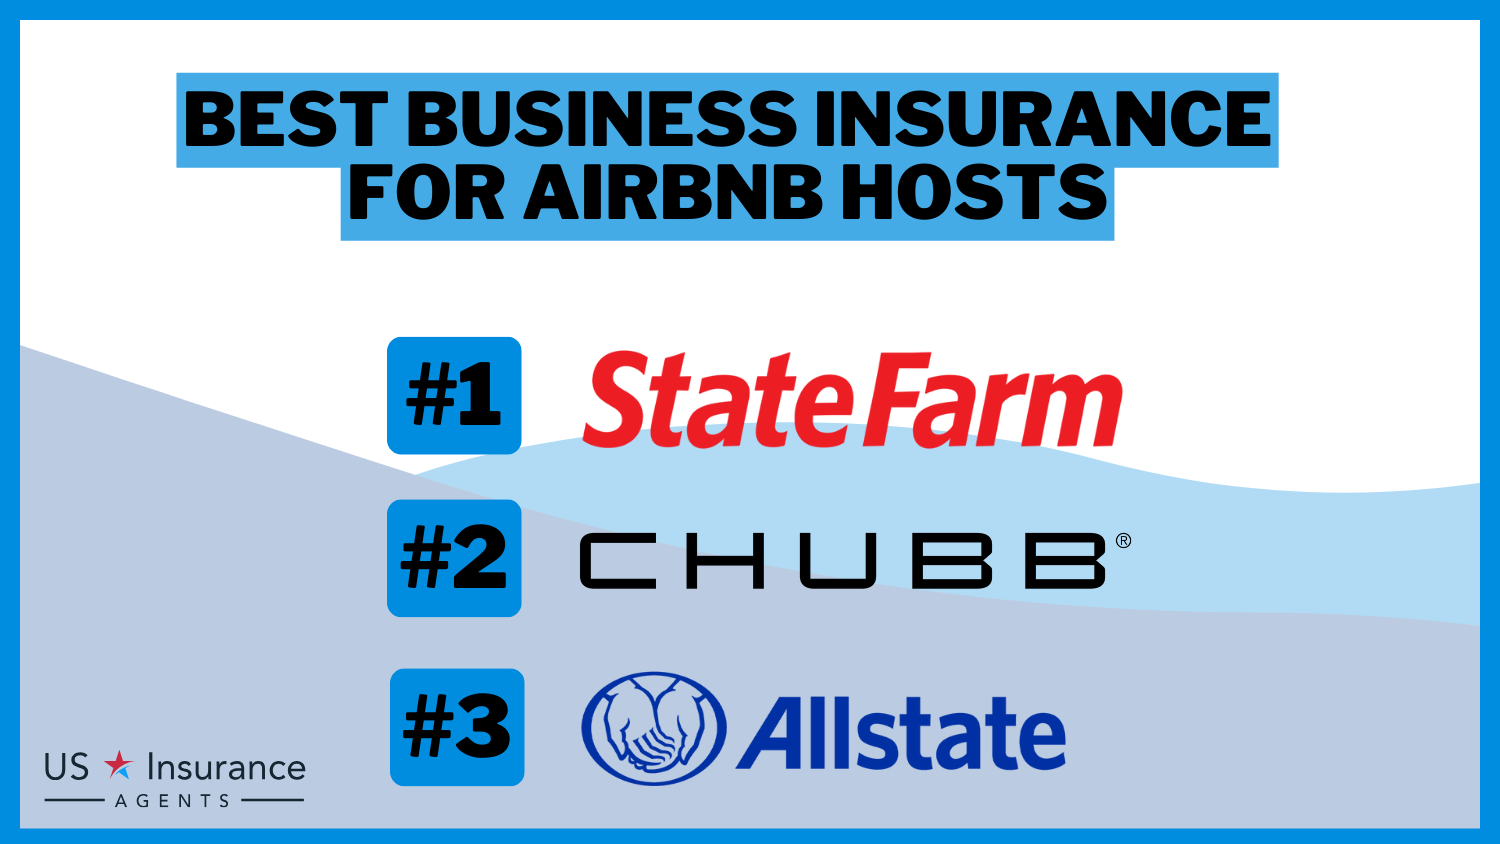 Best Business Insurance for Airbnb Hosts: State Farm, Chubb, Allstate